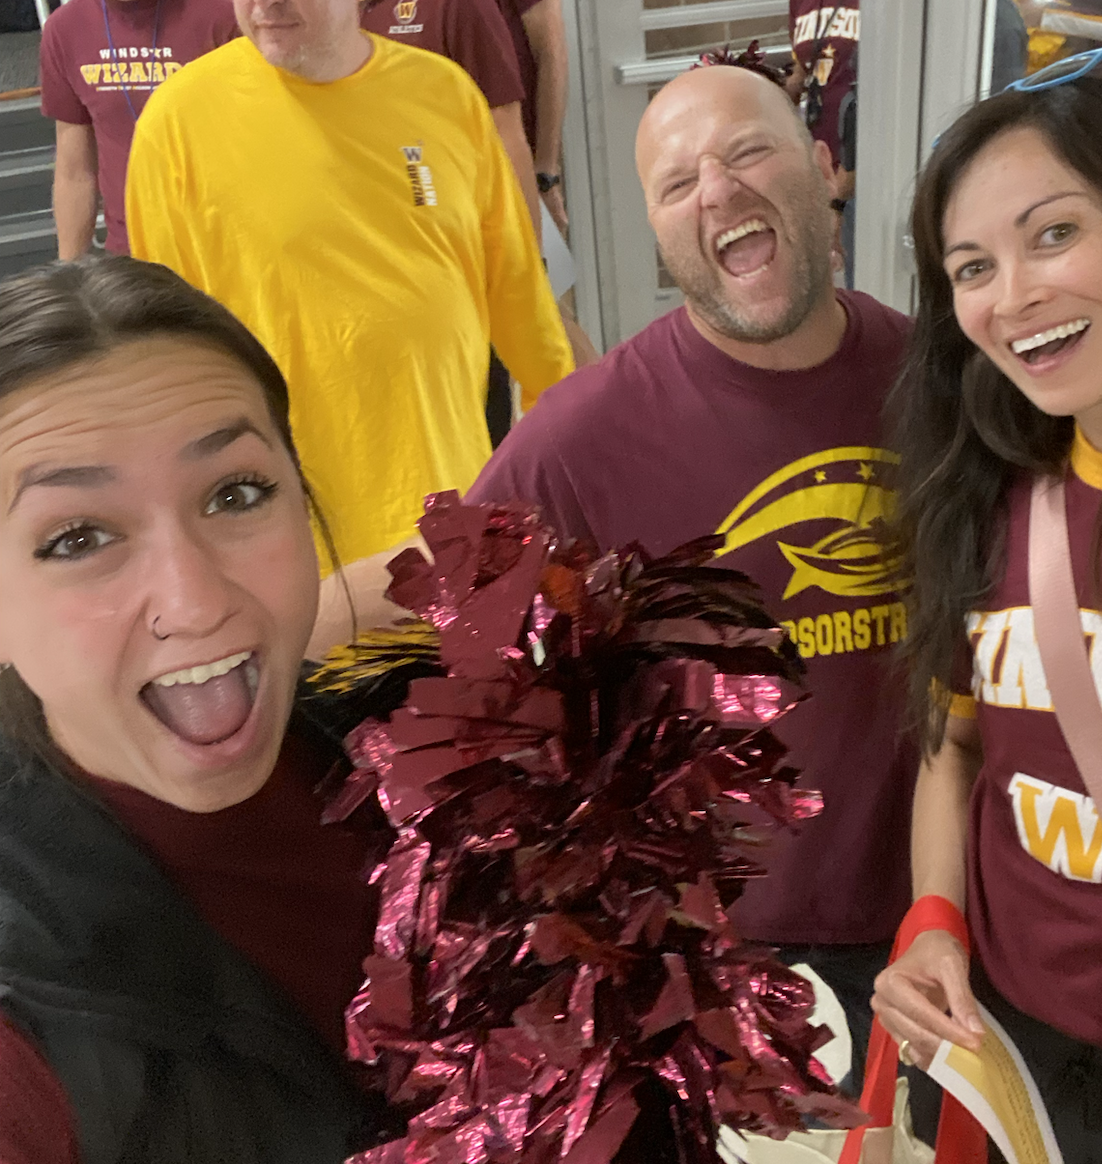 Science teacher Sarah Gray (staff) takes a selfie with department members Paul Katers (staff) and Angela Zier (staff). Gray attended Colorado State University and this is her first year of teaching.